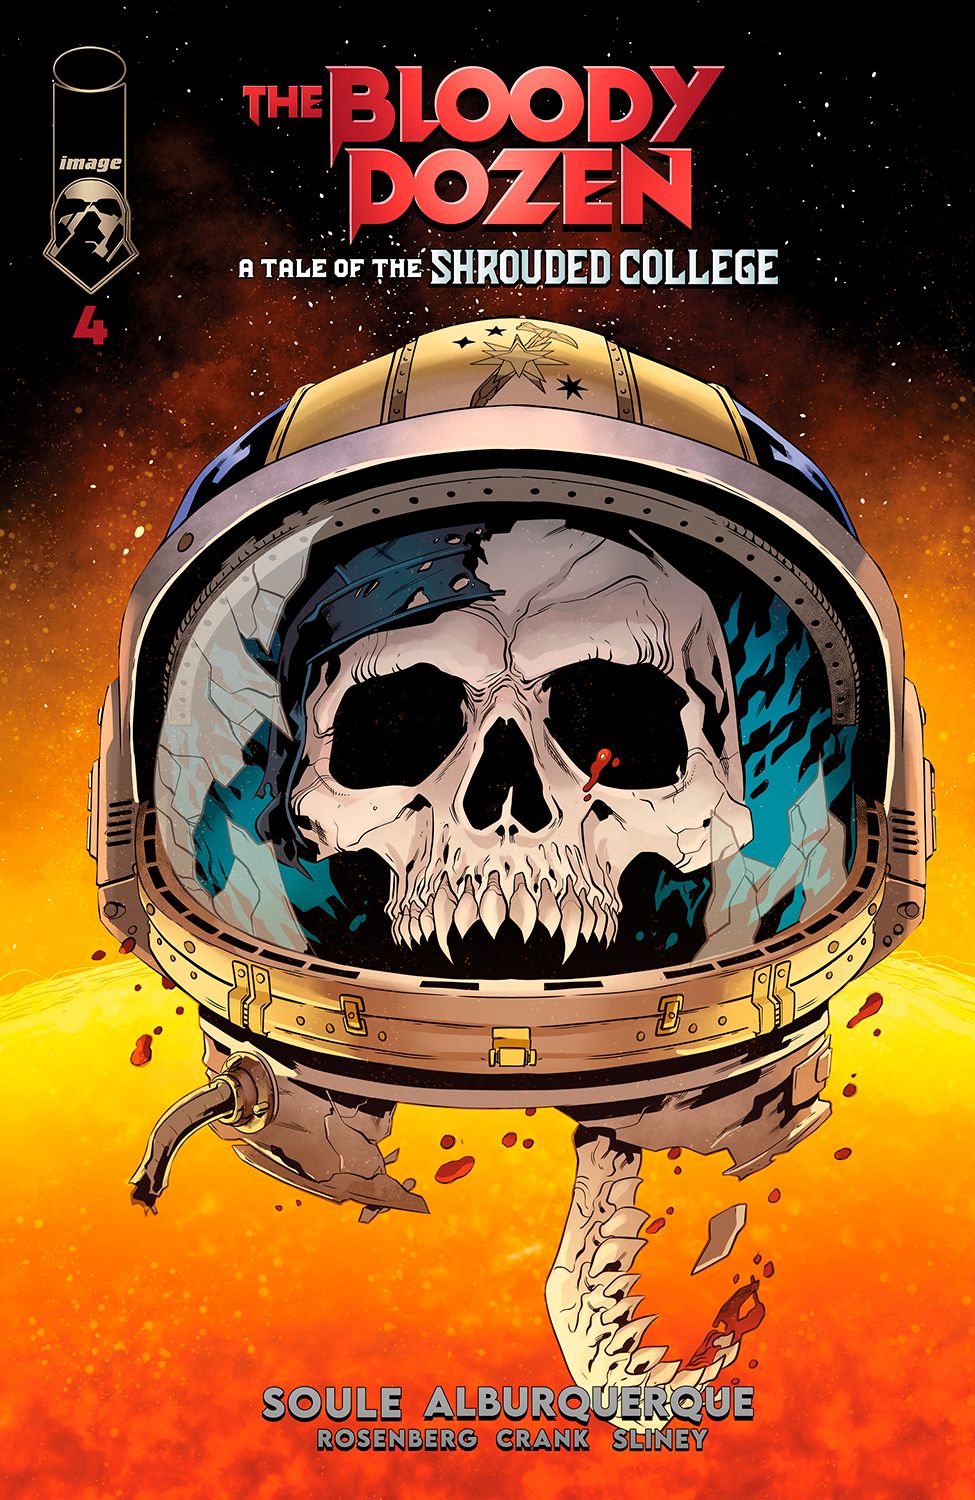 The Bloody Dozen: A Tale of the Shrouded College #4 Comic